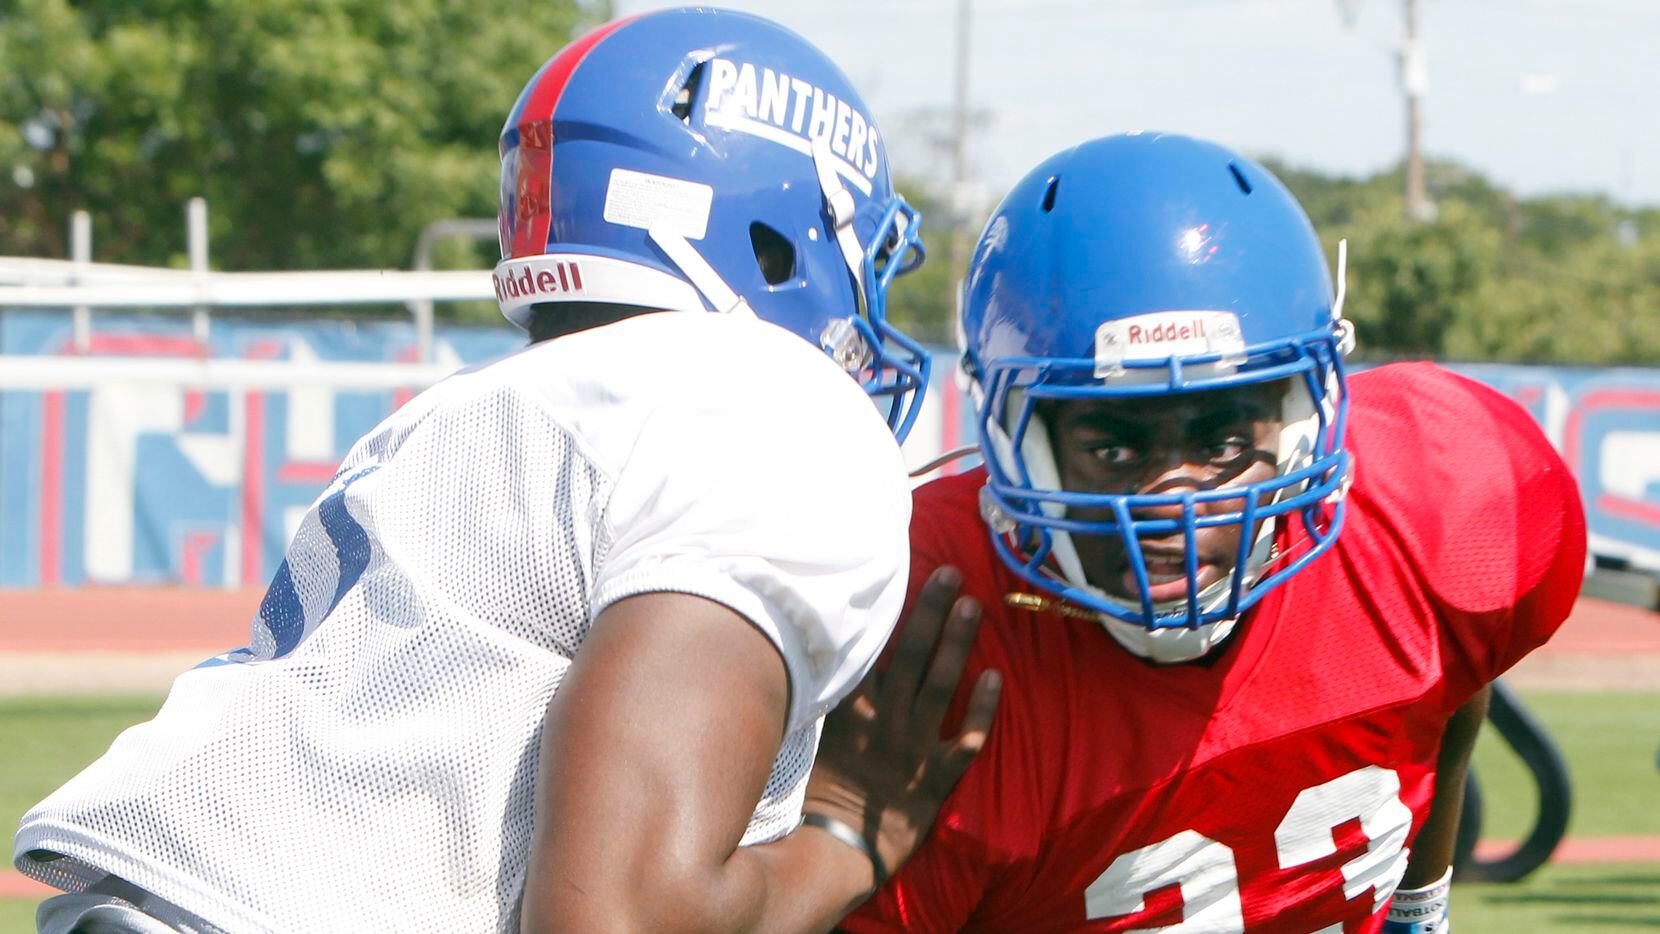 Duncanville Panthers defensive lineman Omari Abor (23) eyes the quarterback as he works around a block. The Duncanville Panthers varsity football team conducted drills during a practice session held at Panther Stadium on their school complex in Duncanville on August 11, 2021.